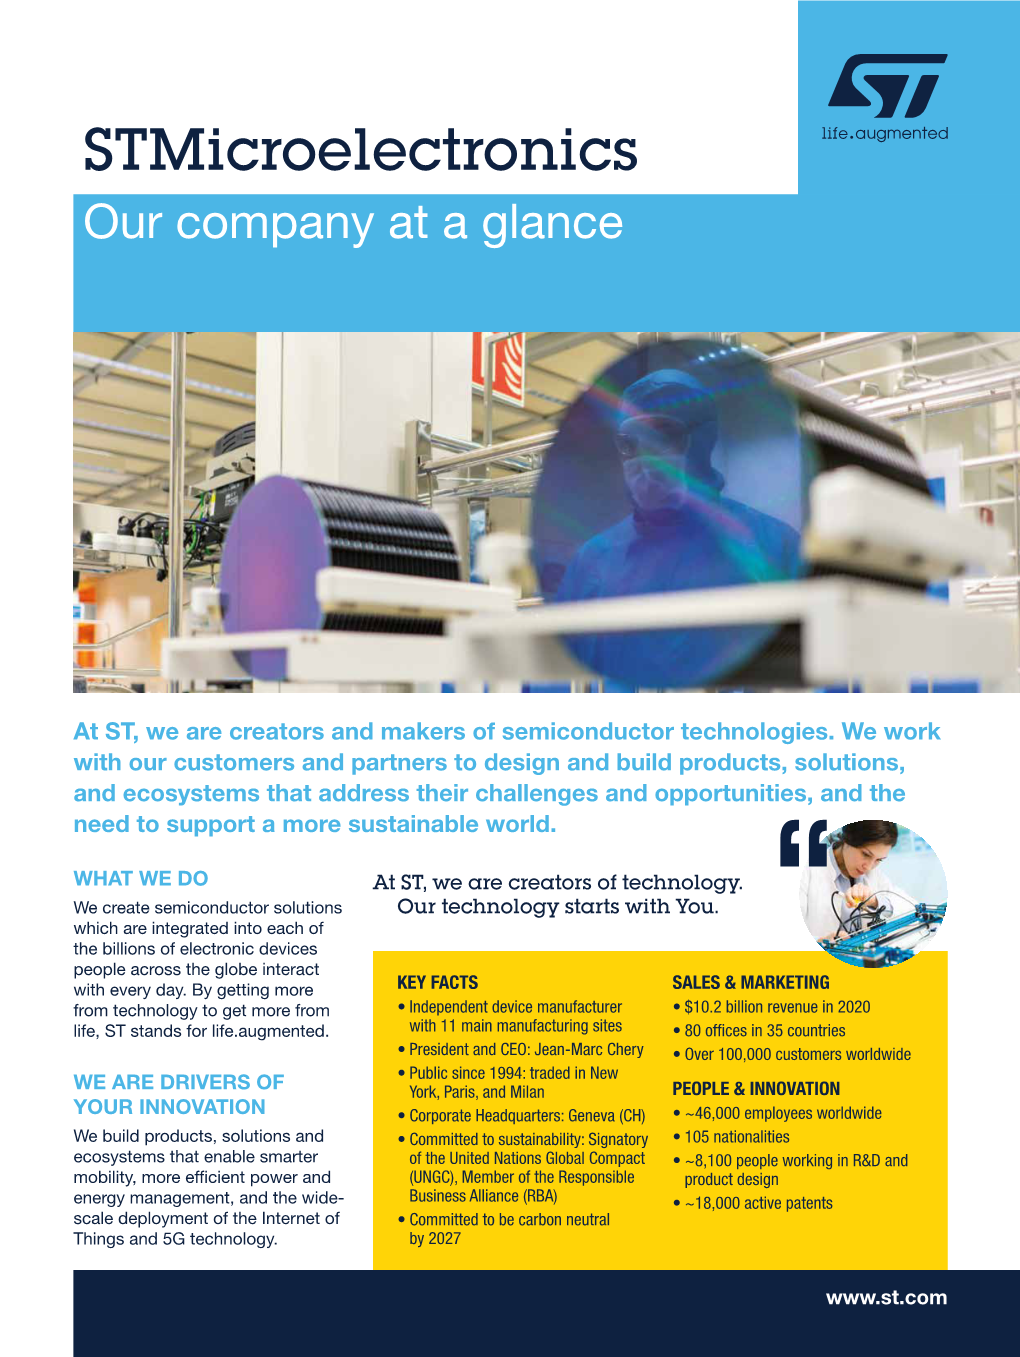 Stmicroelectronics Our Company at a Glance